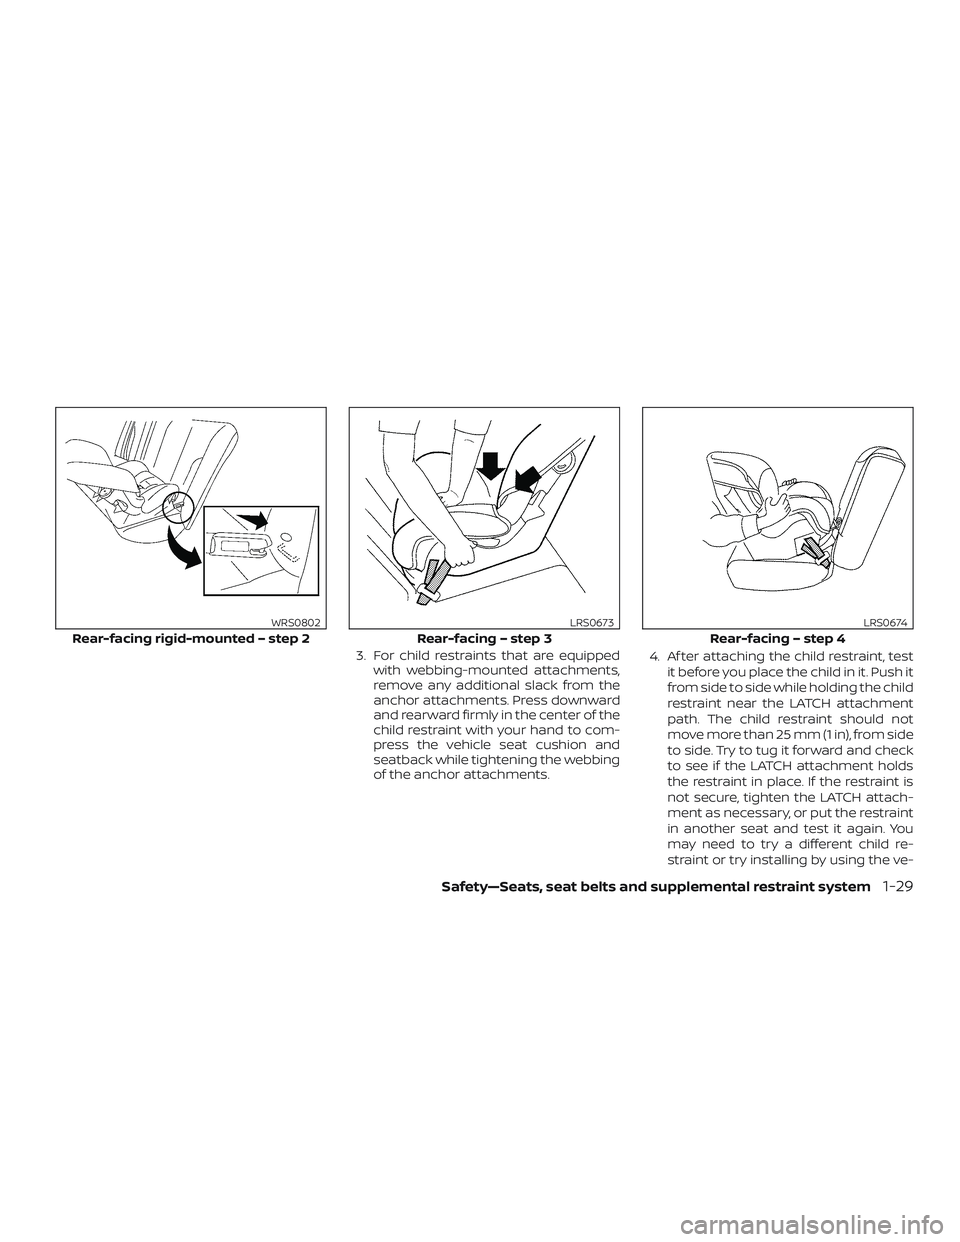 NISSAN MICRA 2023  Owners Manual 3. For child restraints that are equippedwith webbing-mounted attachments,
remove any additional slack from the
anchor attachments. Press downward
and rearward firmly in the center of the
child restra